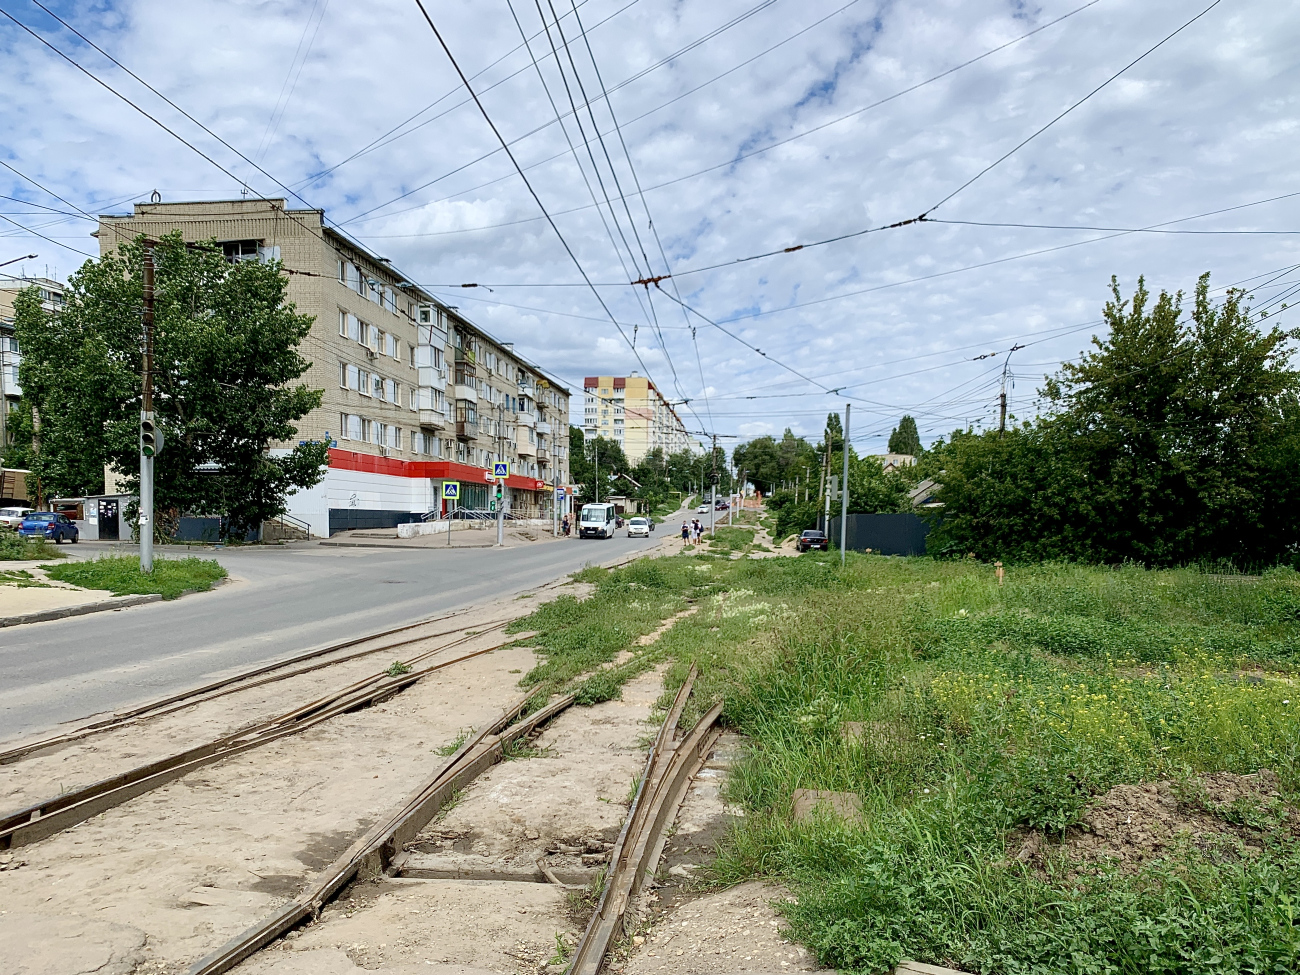 Saratov — Reconstruction of the tram network as part of the implementation of the high—speed tram project — route No. 8; Saratov — Reconstruction of the tram network as part of the implementation of the high—speed tram project — route No. 9